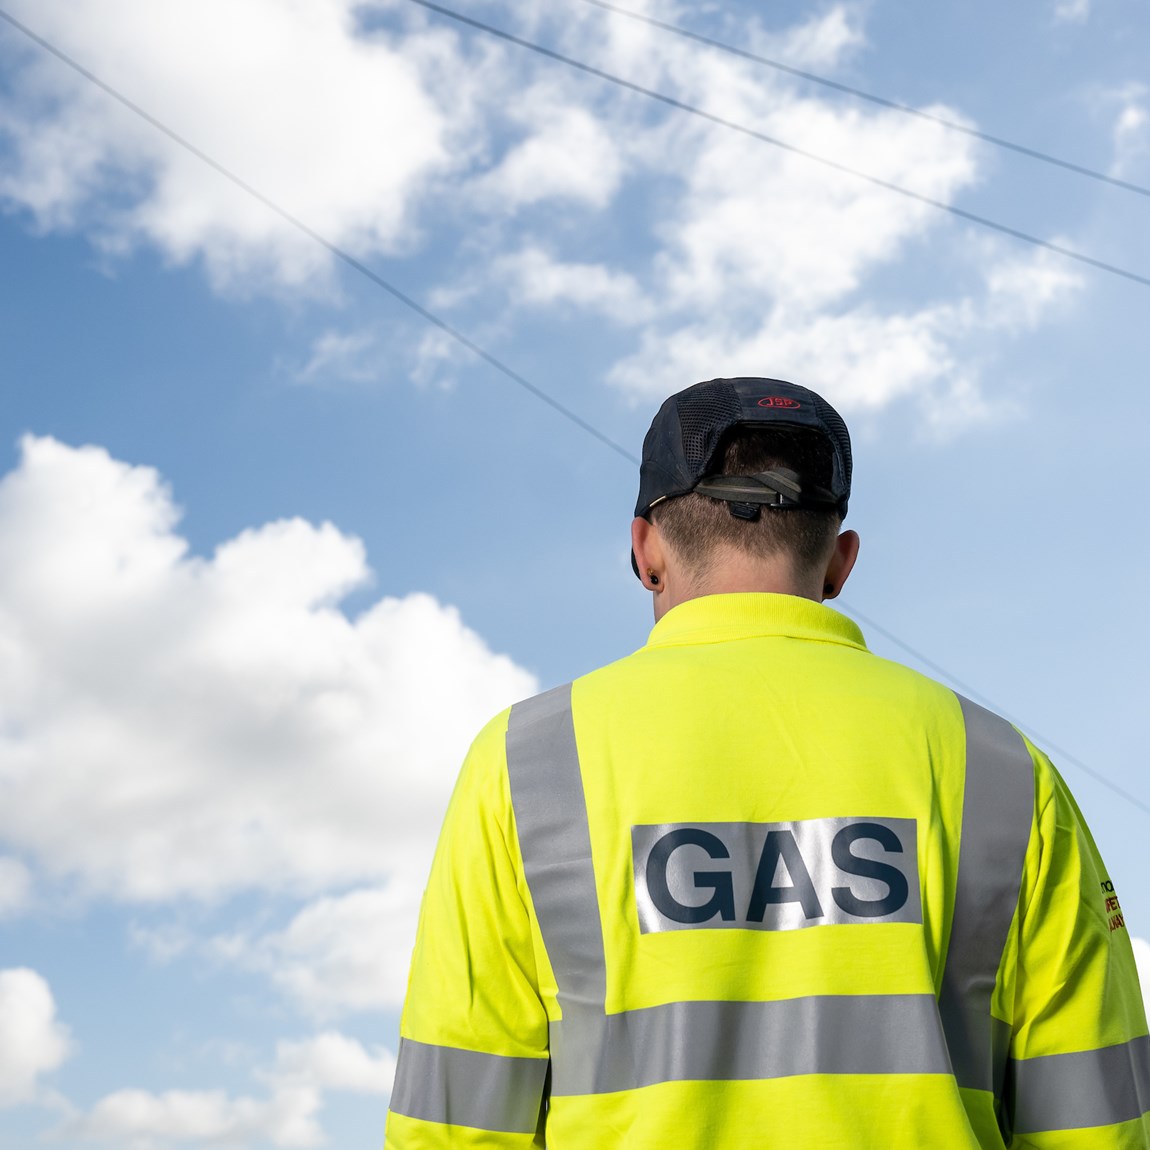 £120,000 gas pipe investment scheme arrives in Exeter